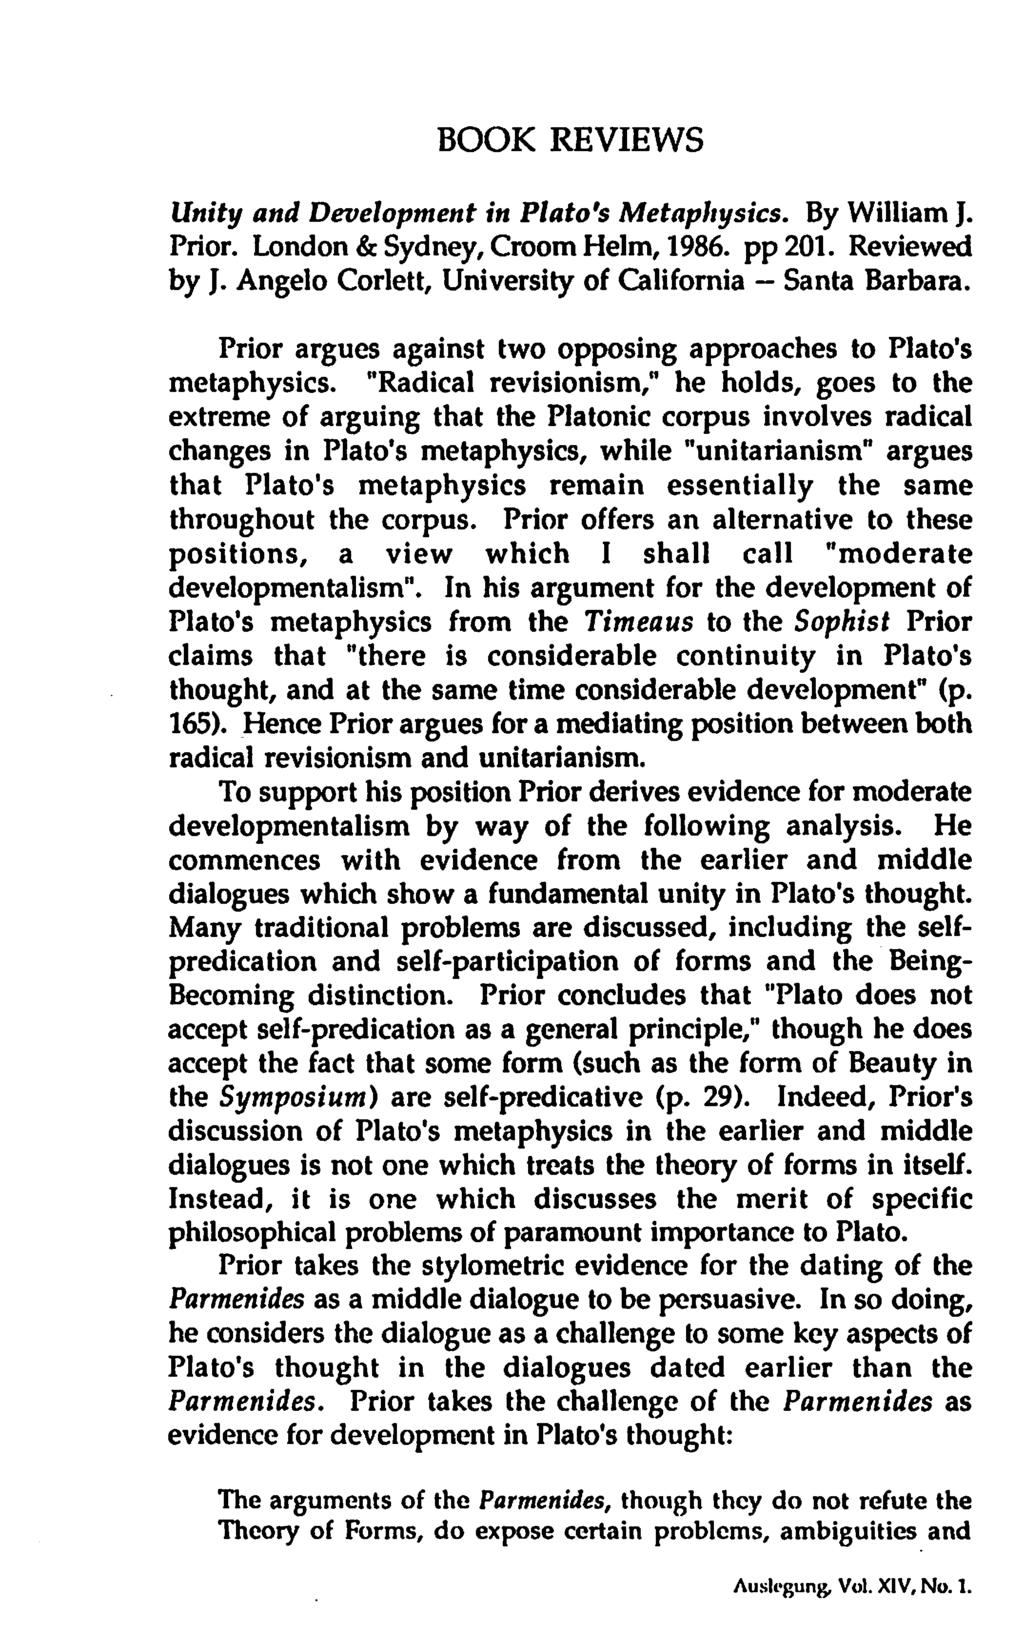 BOOK REVIEWS Unity and Development in Plato's Metaphysics. By William J. Prior. London & Sydney, Croom Helm, 1986. pp201. Reviewed by J. Angelo Corlett, University of California Santa Barbara.